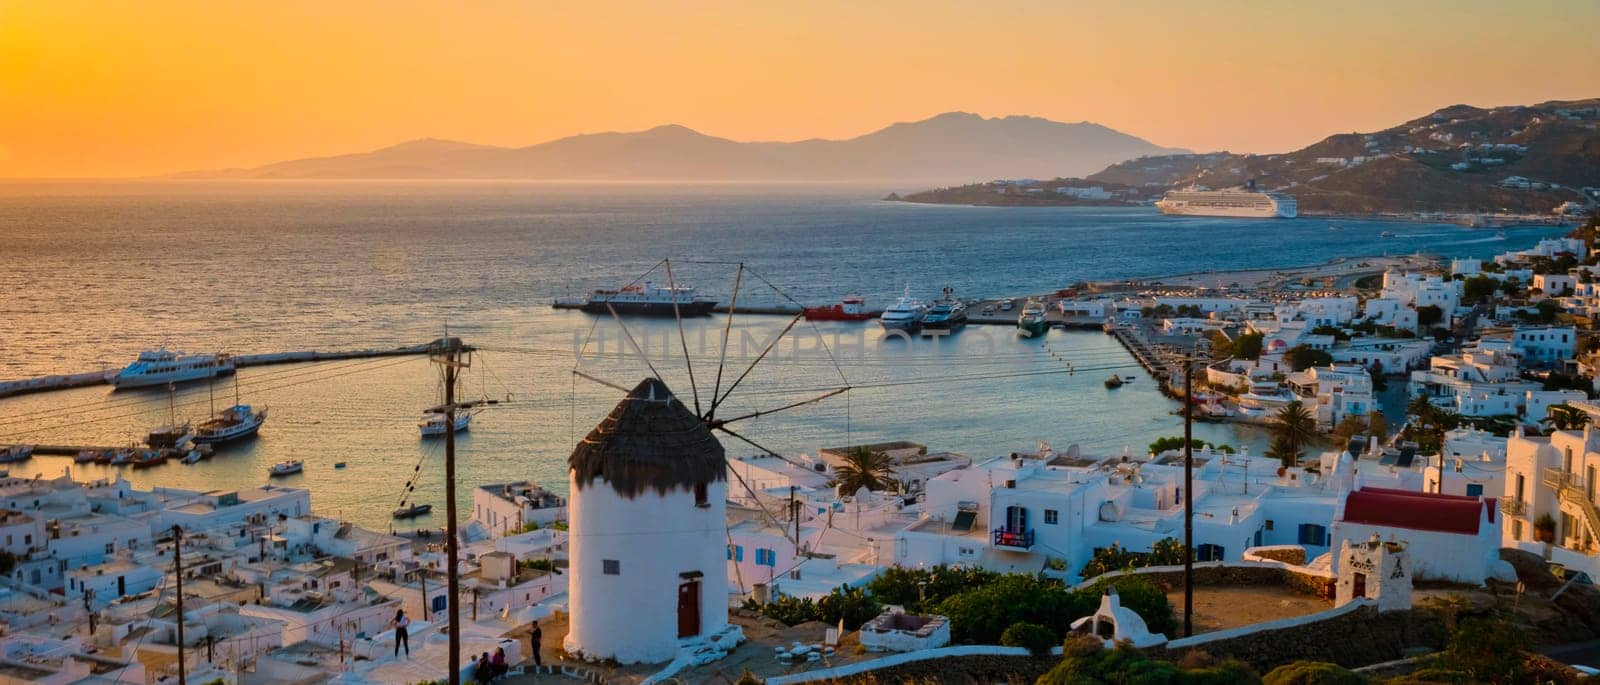 Sunset on the hills of Mykonos Greek village in Greece, the colorful old town of Mikonos village with historical windmills